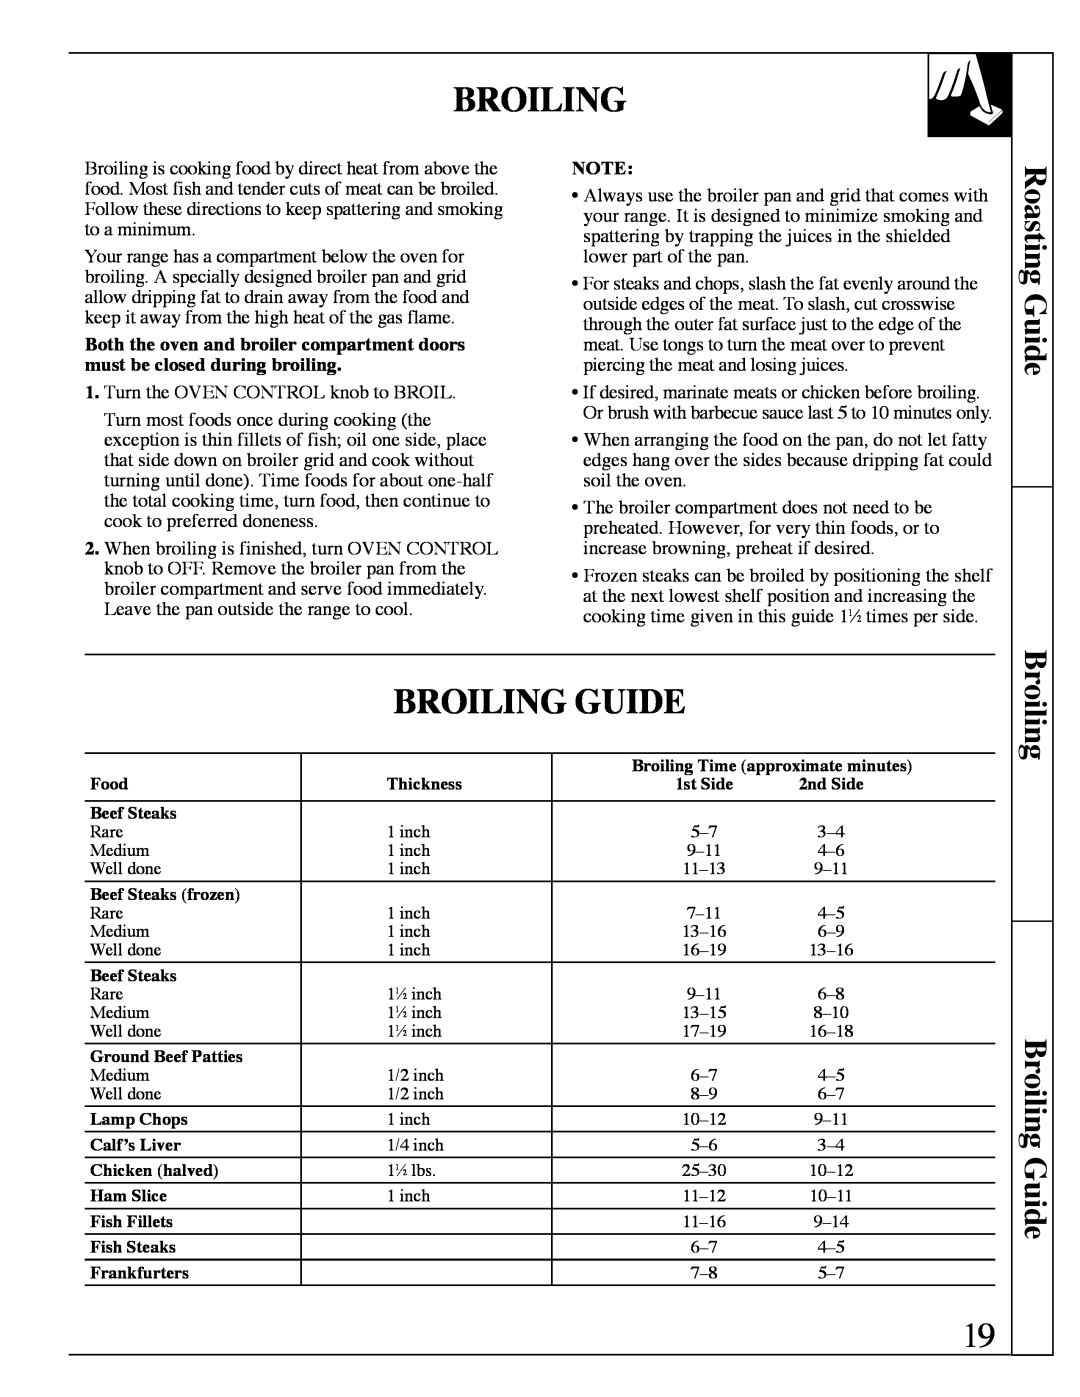 Hotpoint RGB506 installation instructions Roasting Guide, Broiling Broiling Guide 